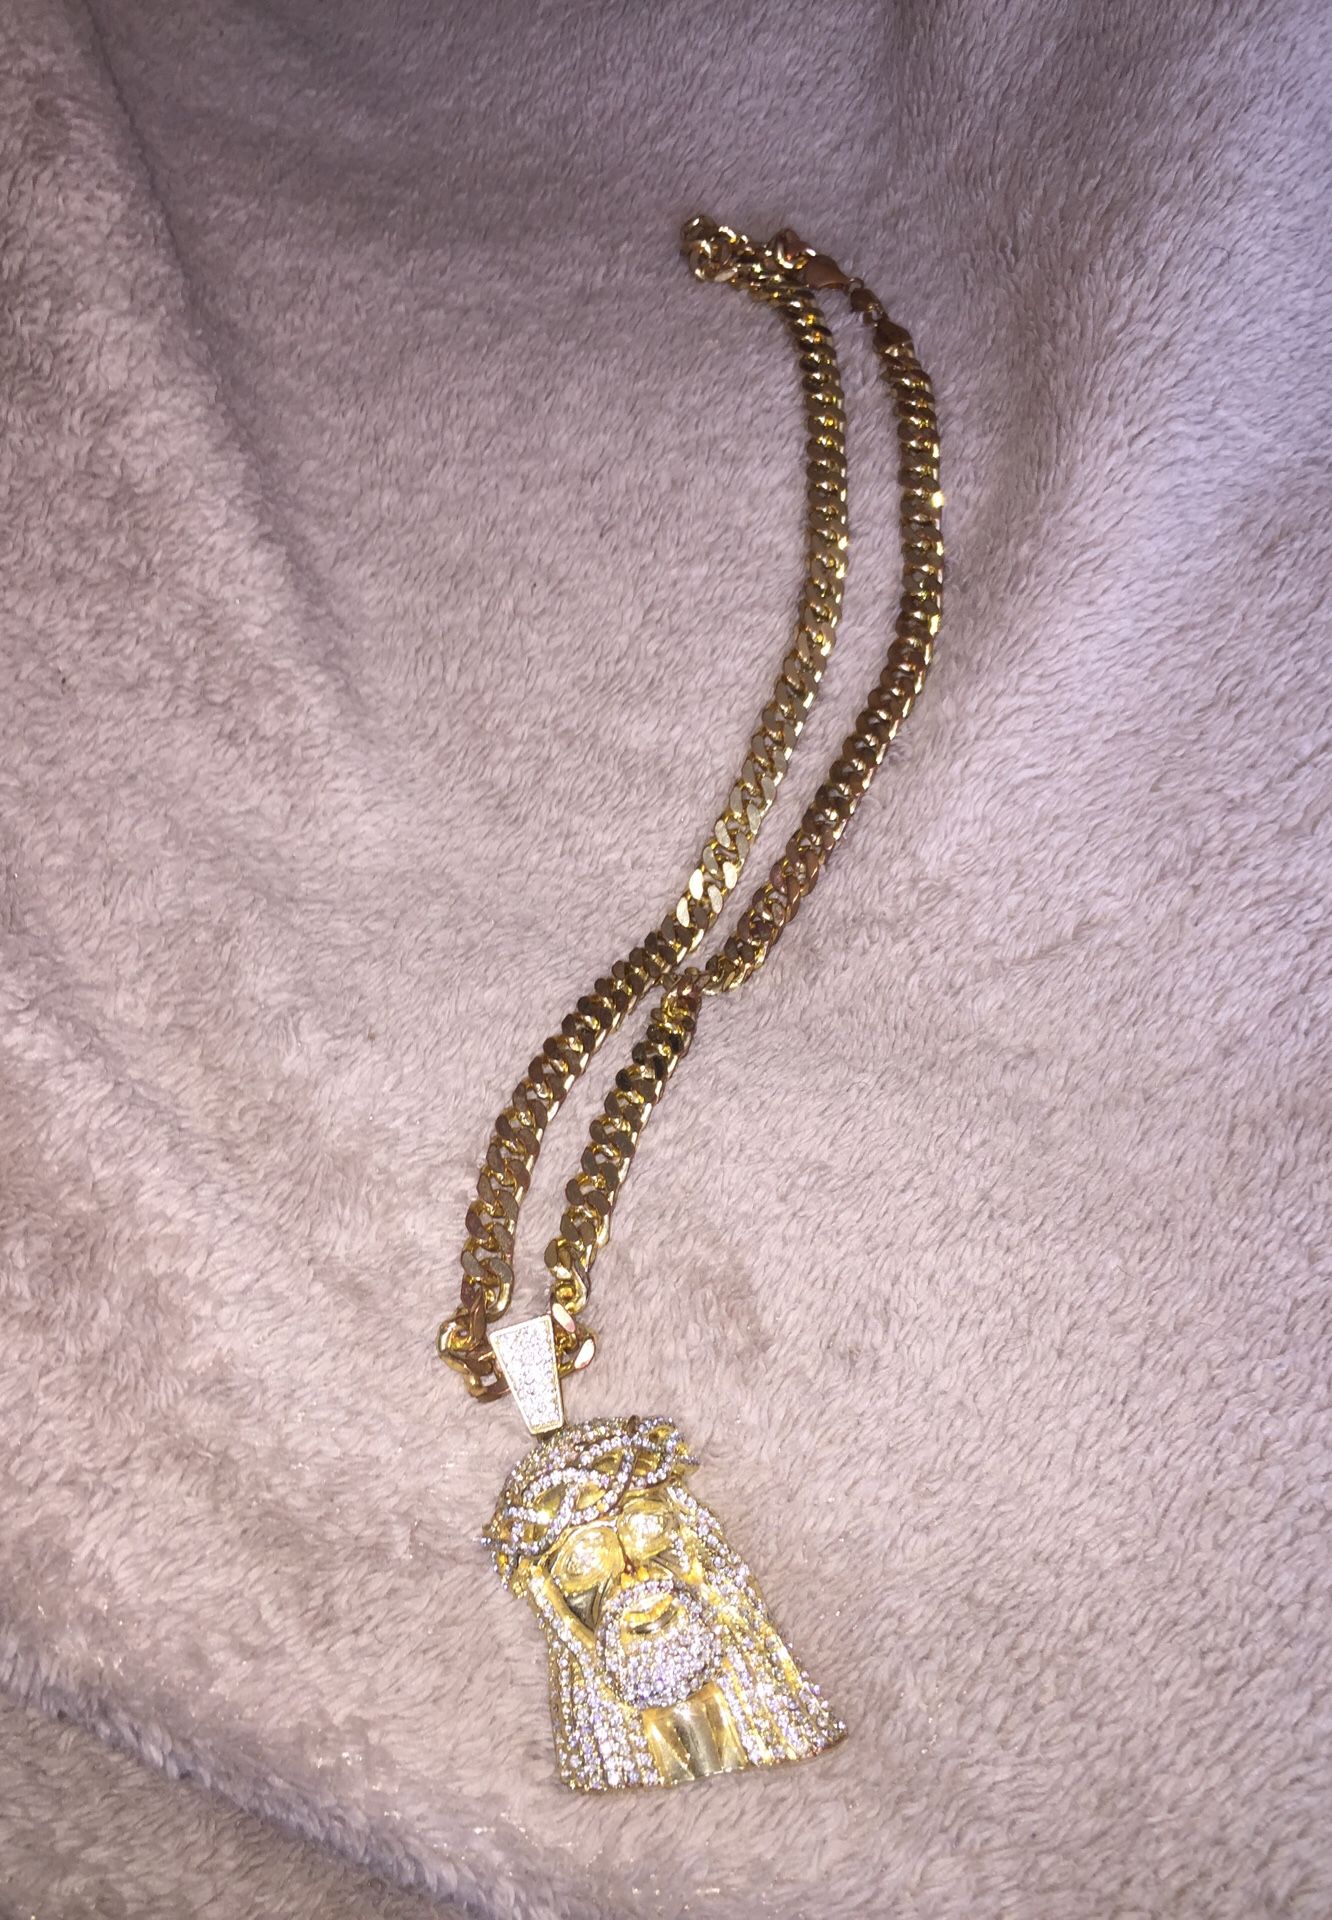 $50 Gold Plated Jesus Chain